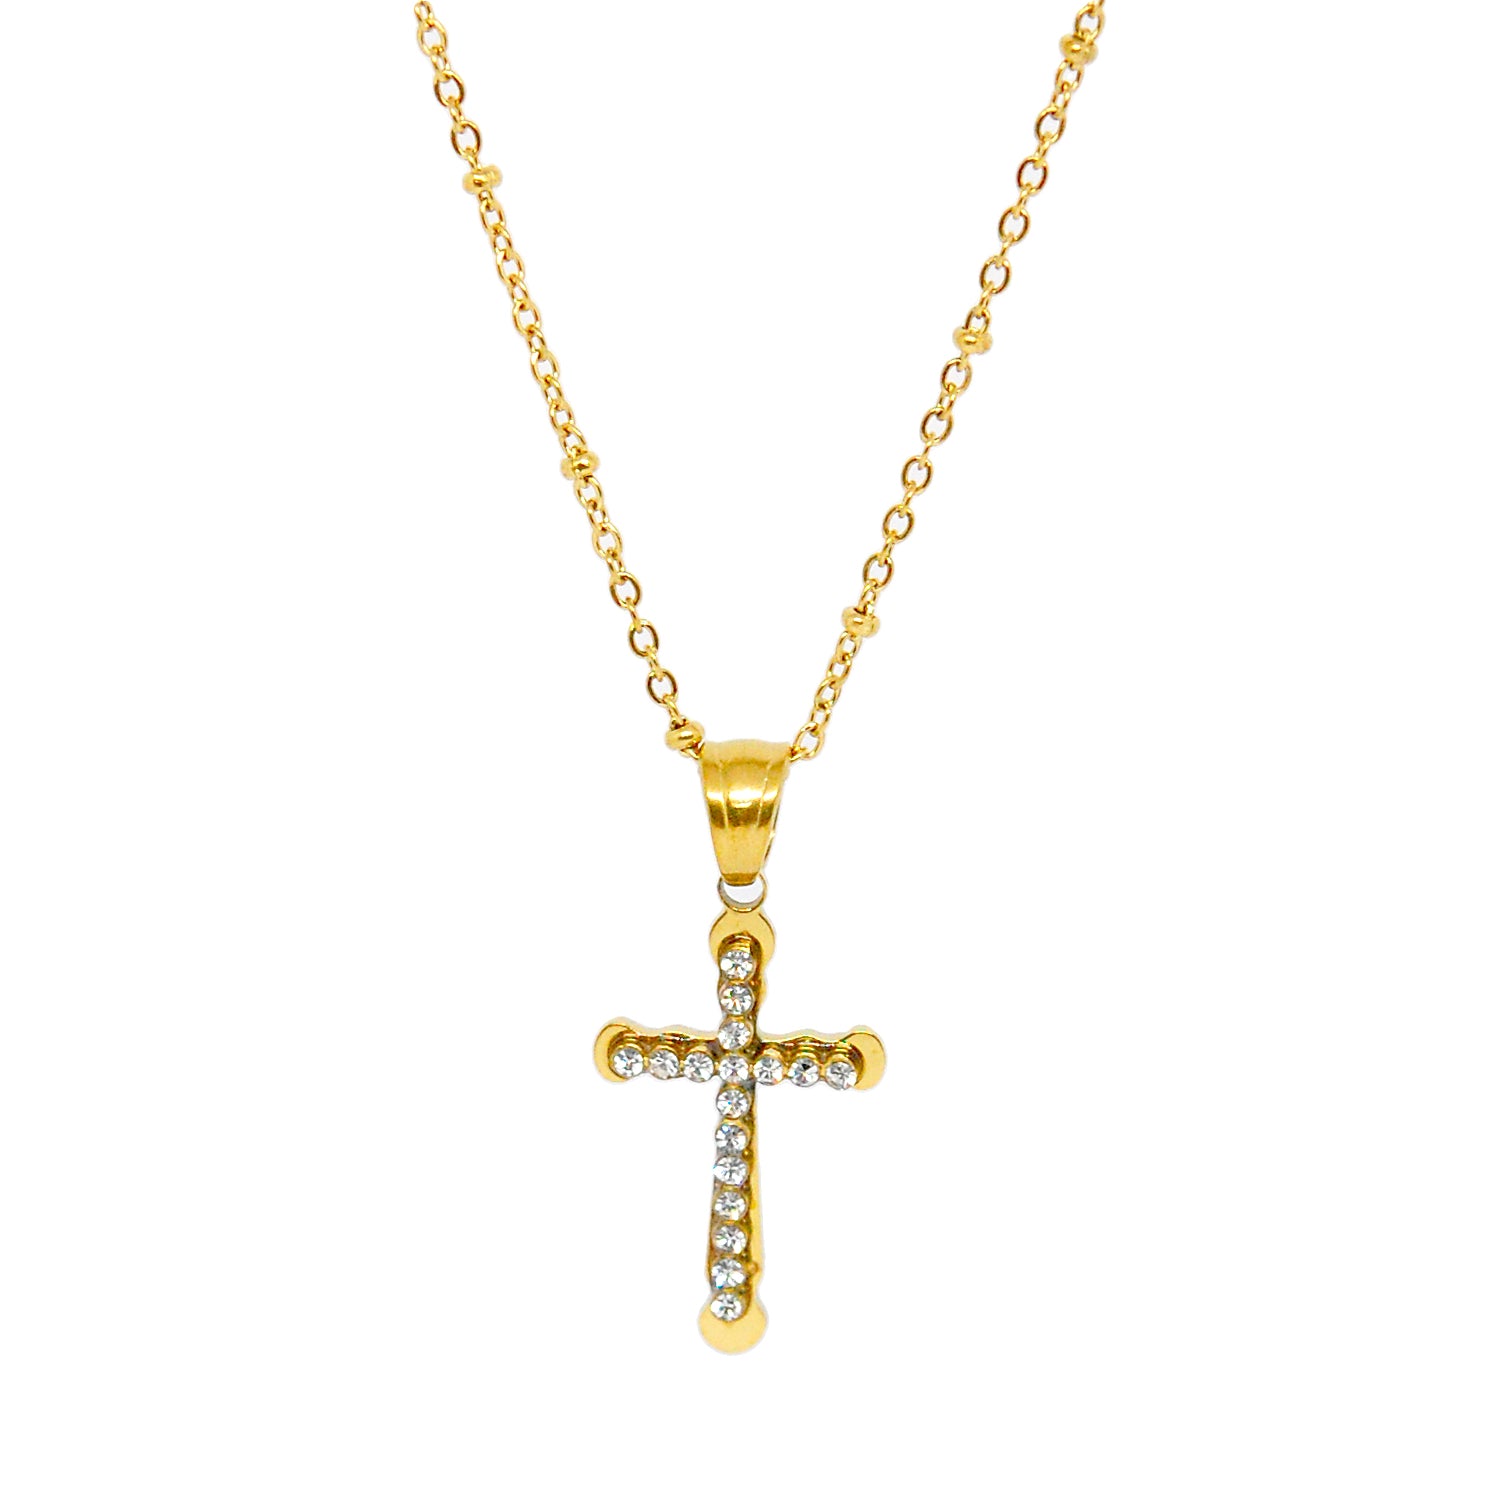 ESP 7987: All IPG Elegant Cz-Studded Cross Necklace w/ 19" IPG Med Link w/ Ball Ch